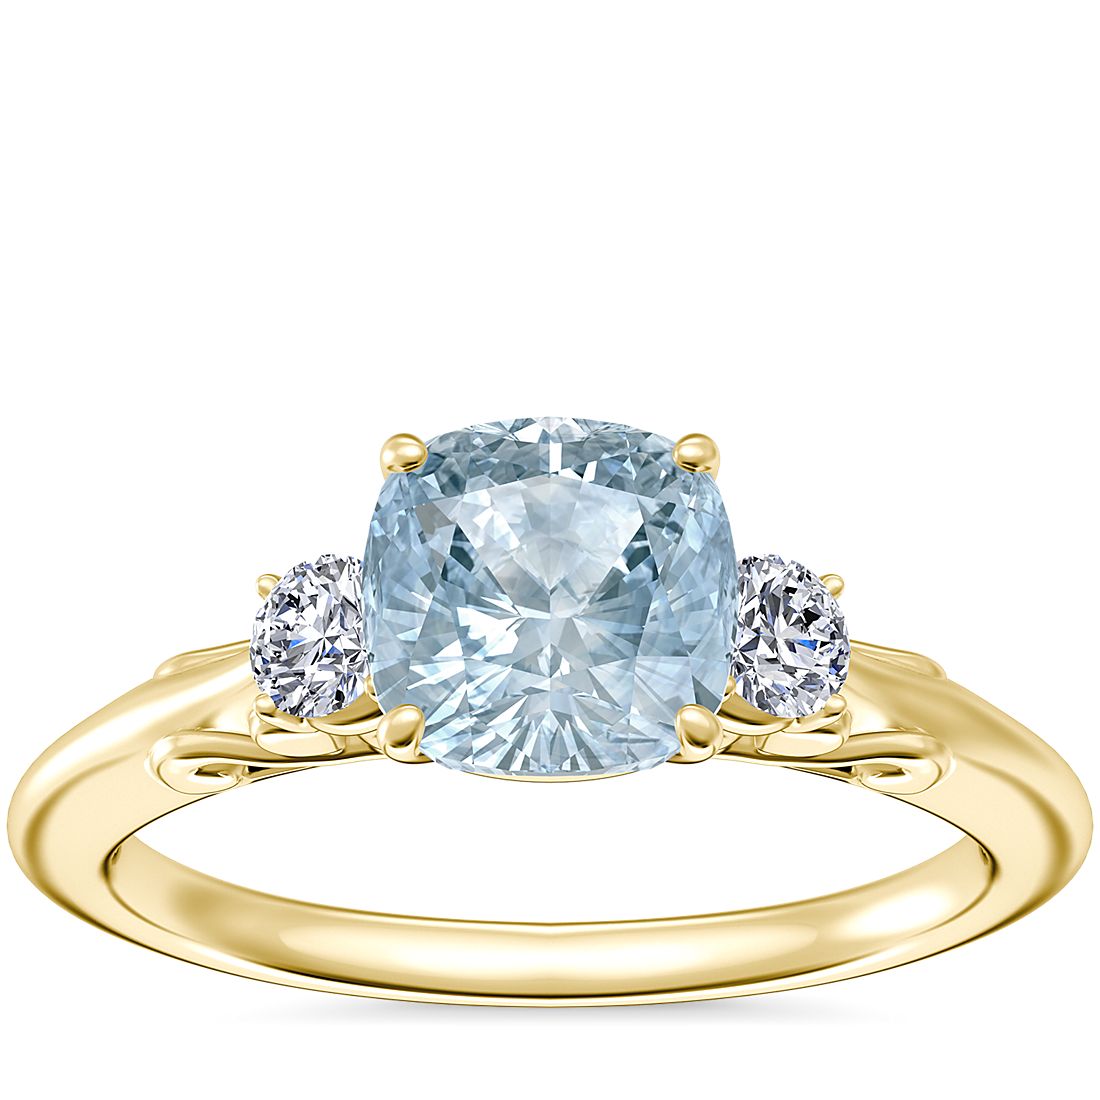 Vintage Three Stone Engagement Ring with Cushion Aquamarine in 14k Yellow Gold (6.5mm)